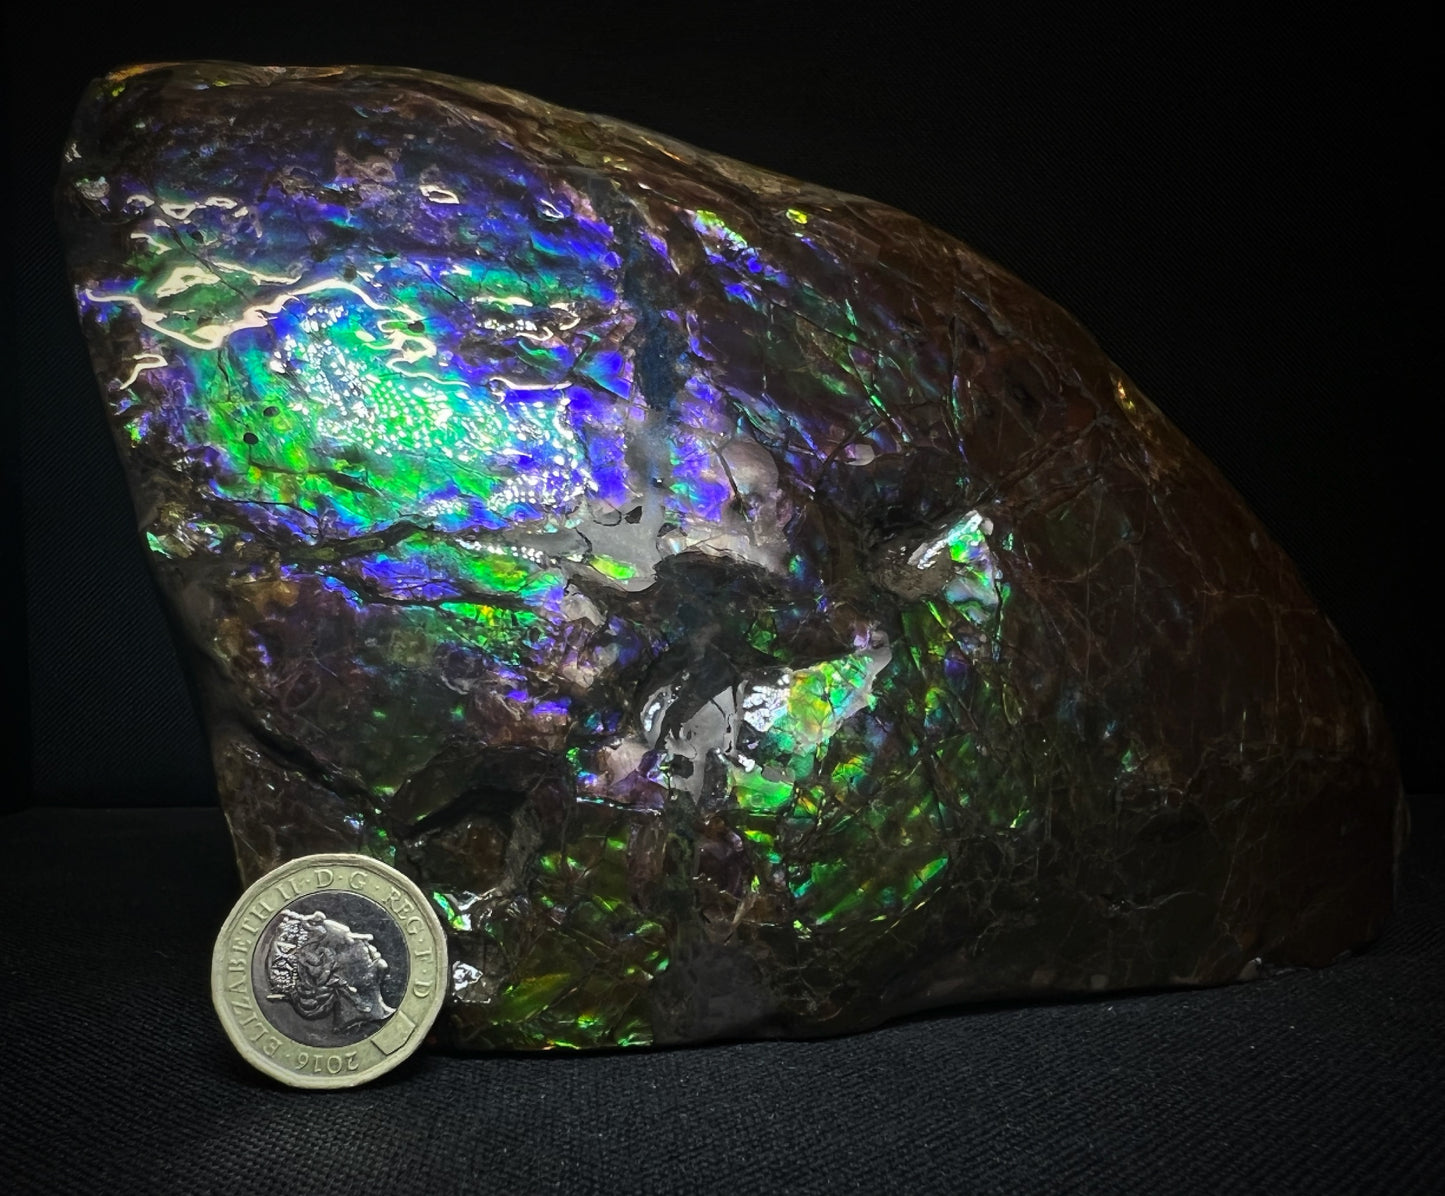 Remarkable Ammolite Gem Specimen With Teeth Impressions Of The Mosasaur From Alberta, Canada- Fossil, Gem, Collectors Piece